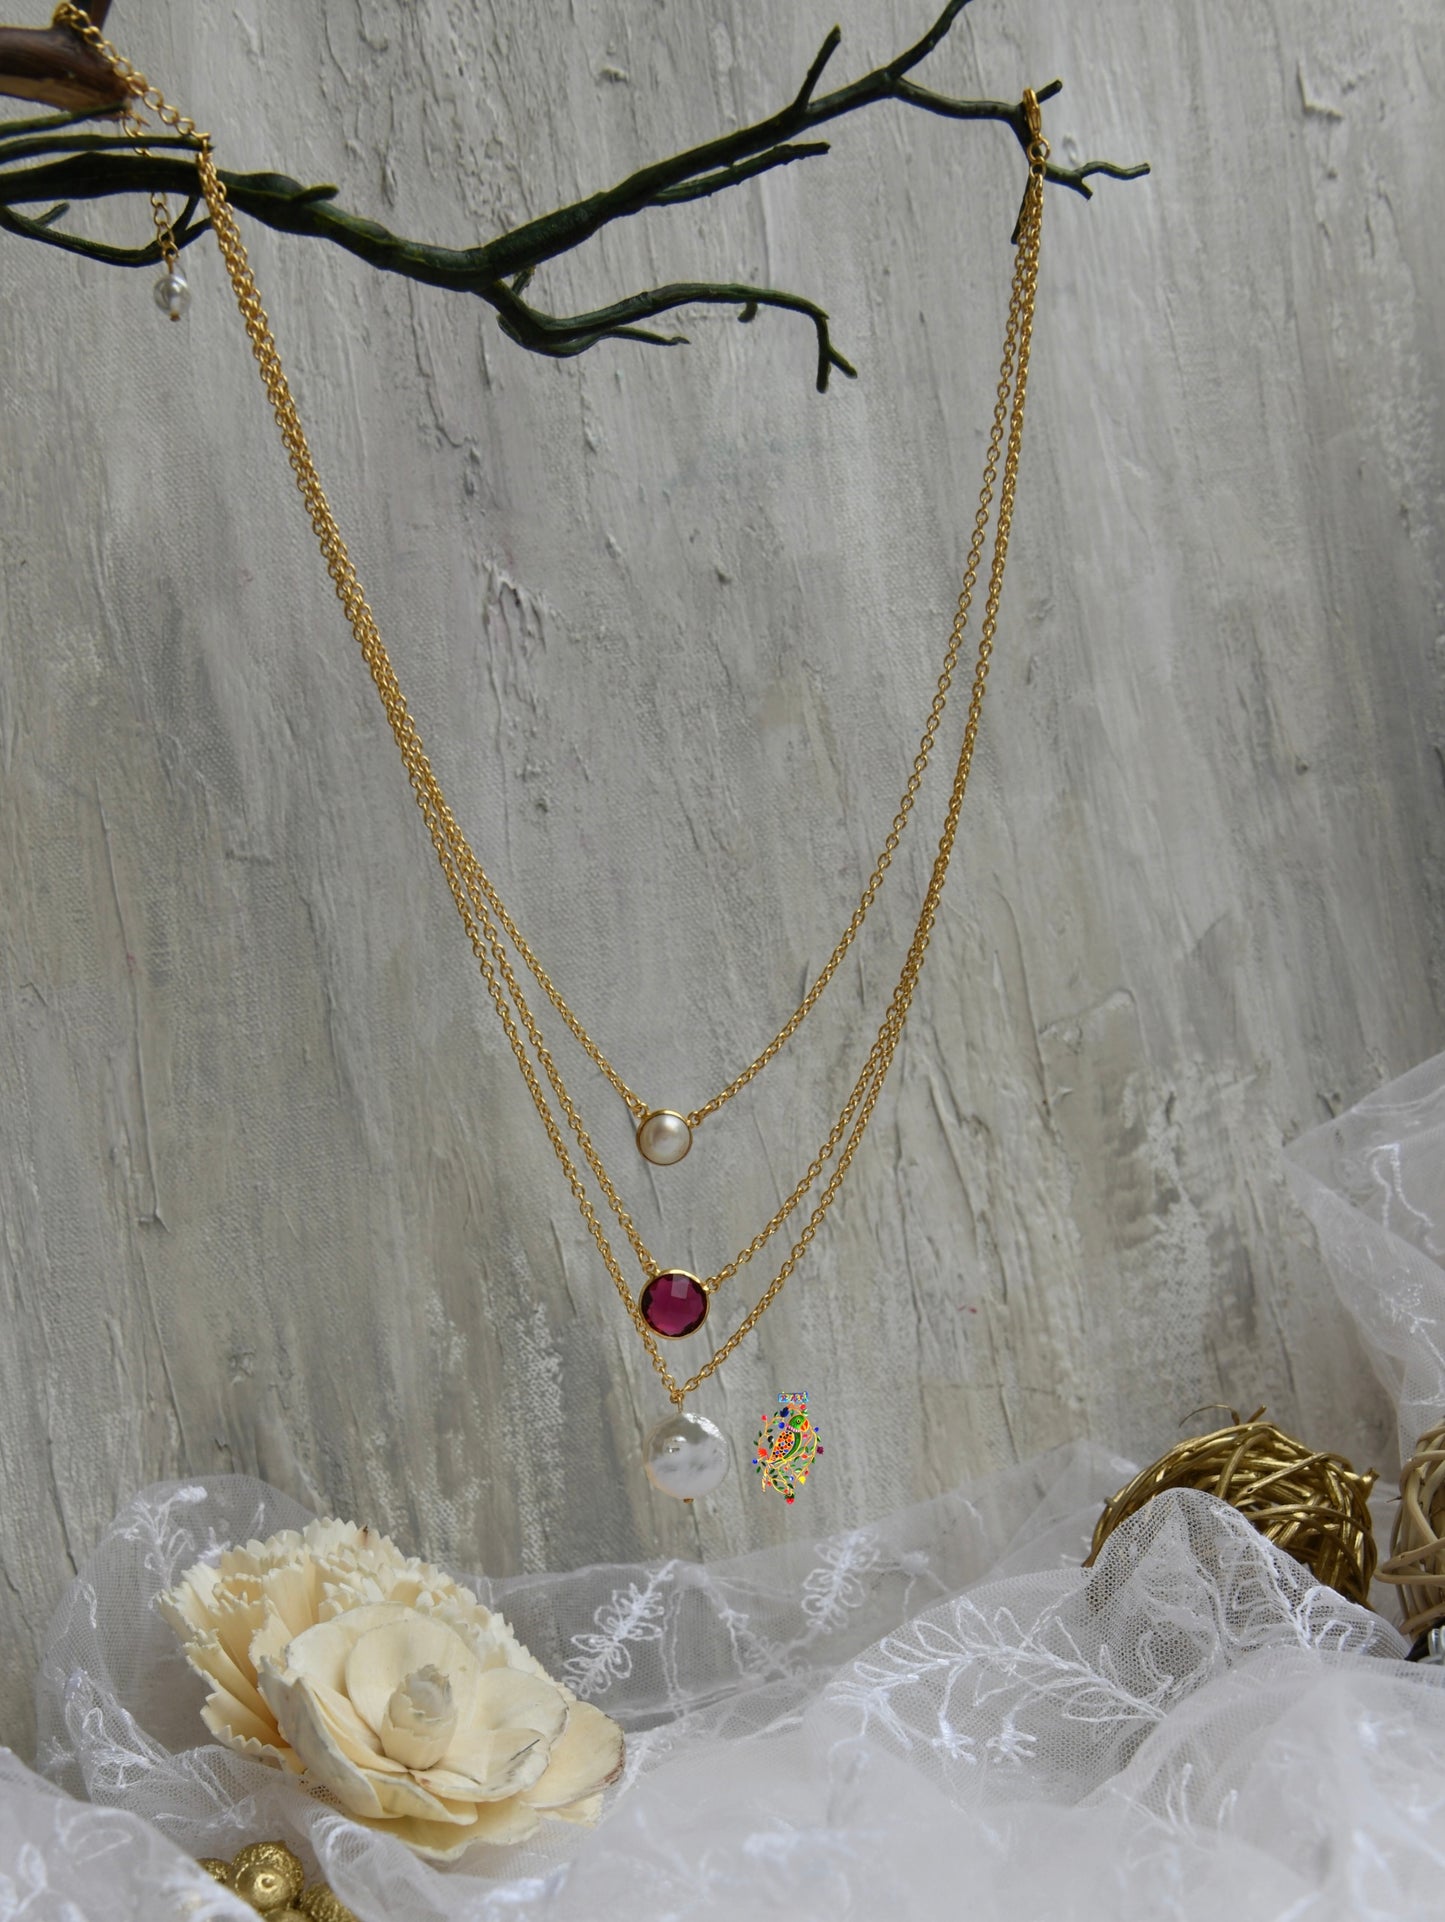 Eve's Charm Necklace with Red Wine Drops